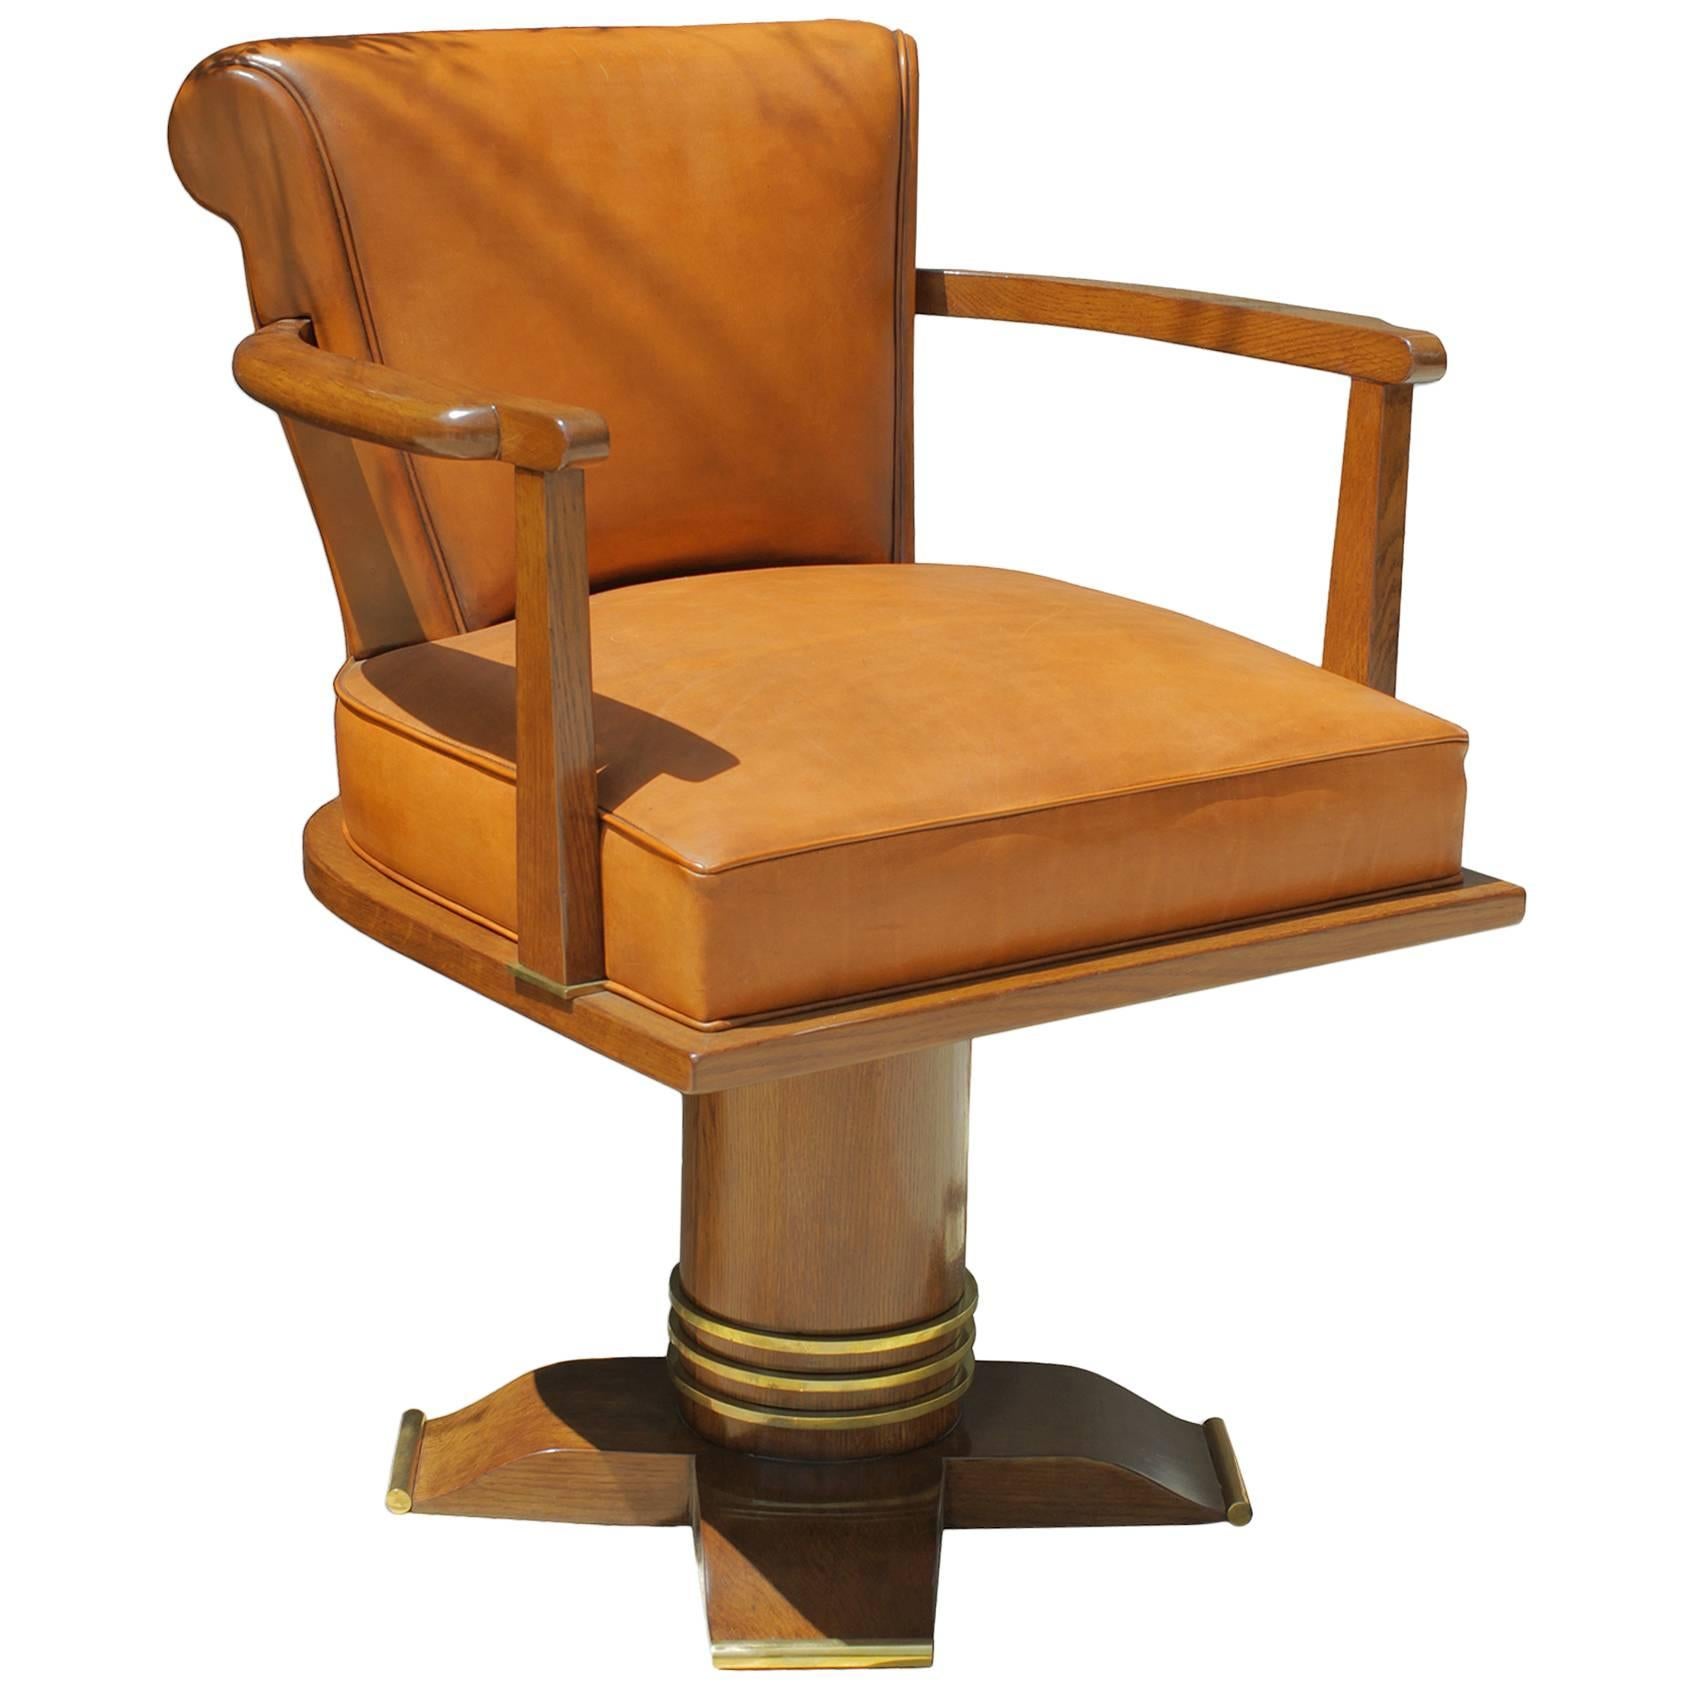 Jules Leleu desk chair (attributed to) France 1930